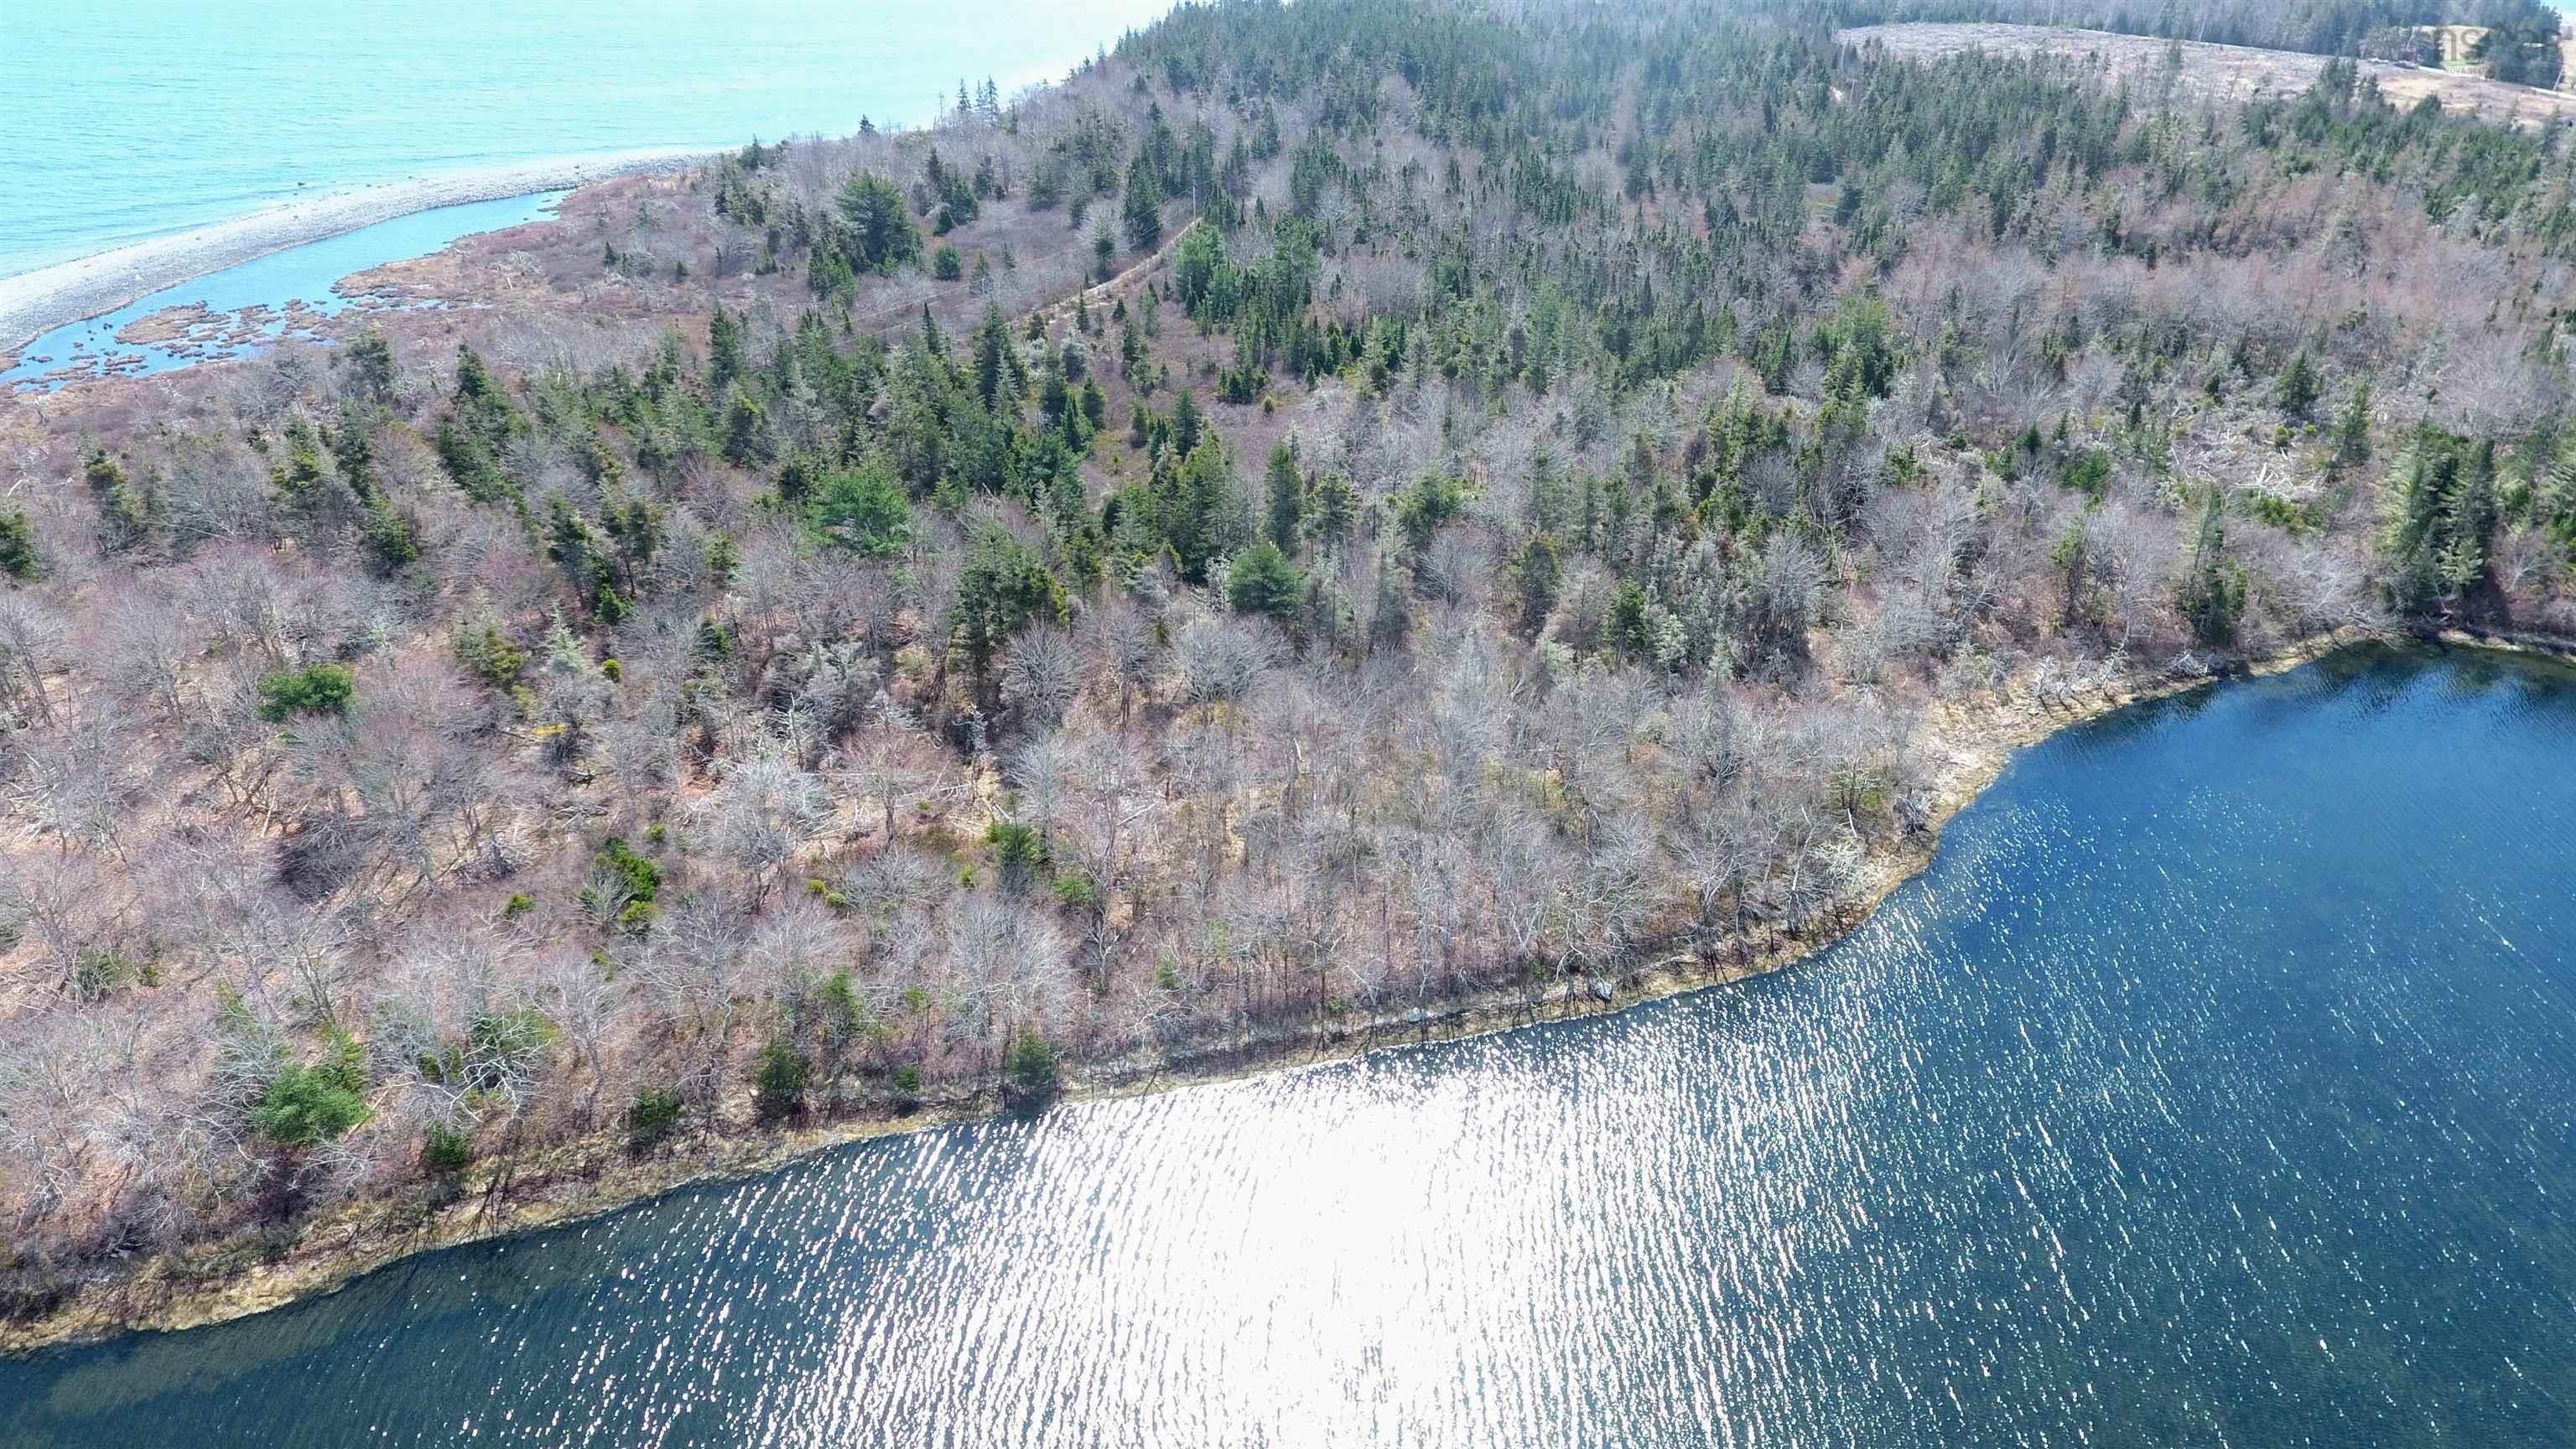 Main Photo: Lot 16 MCLEANS ISLAND Road in Jordan Bay: 407-Shelburne County Vacant Land for sale (South Shore)  : MLS®# 202306554